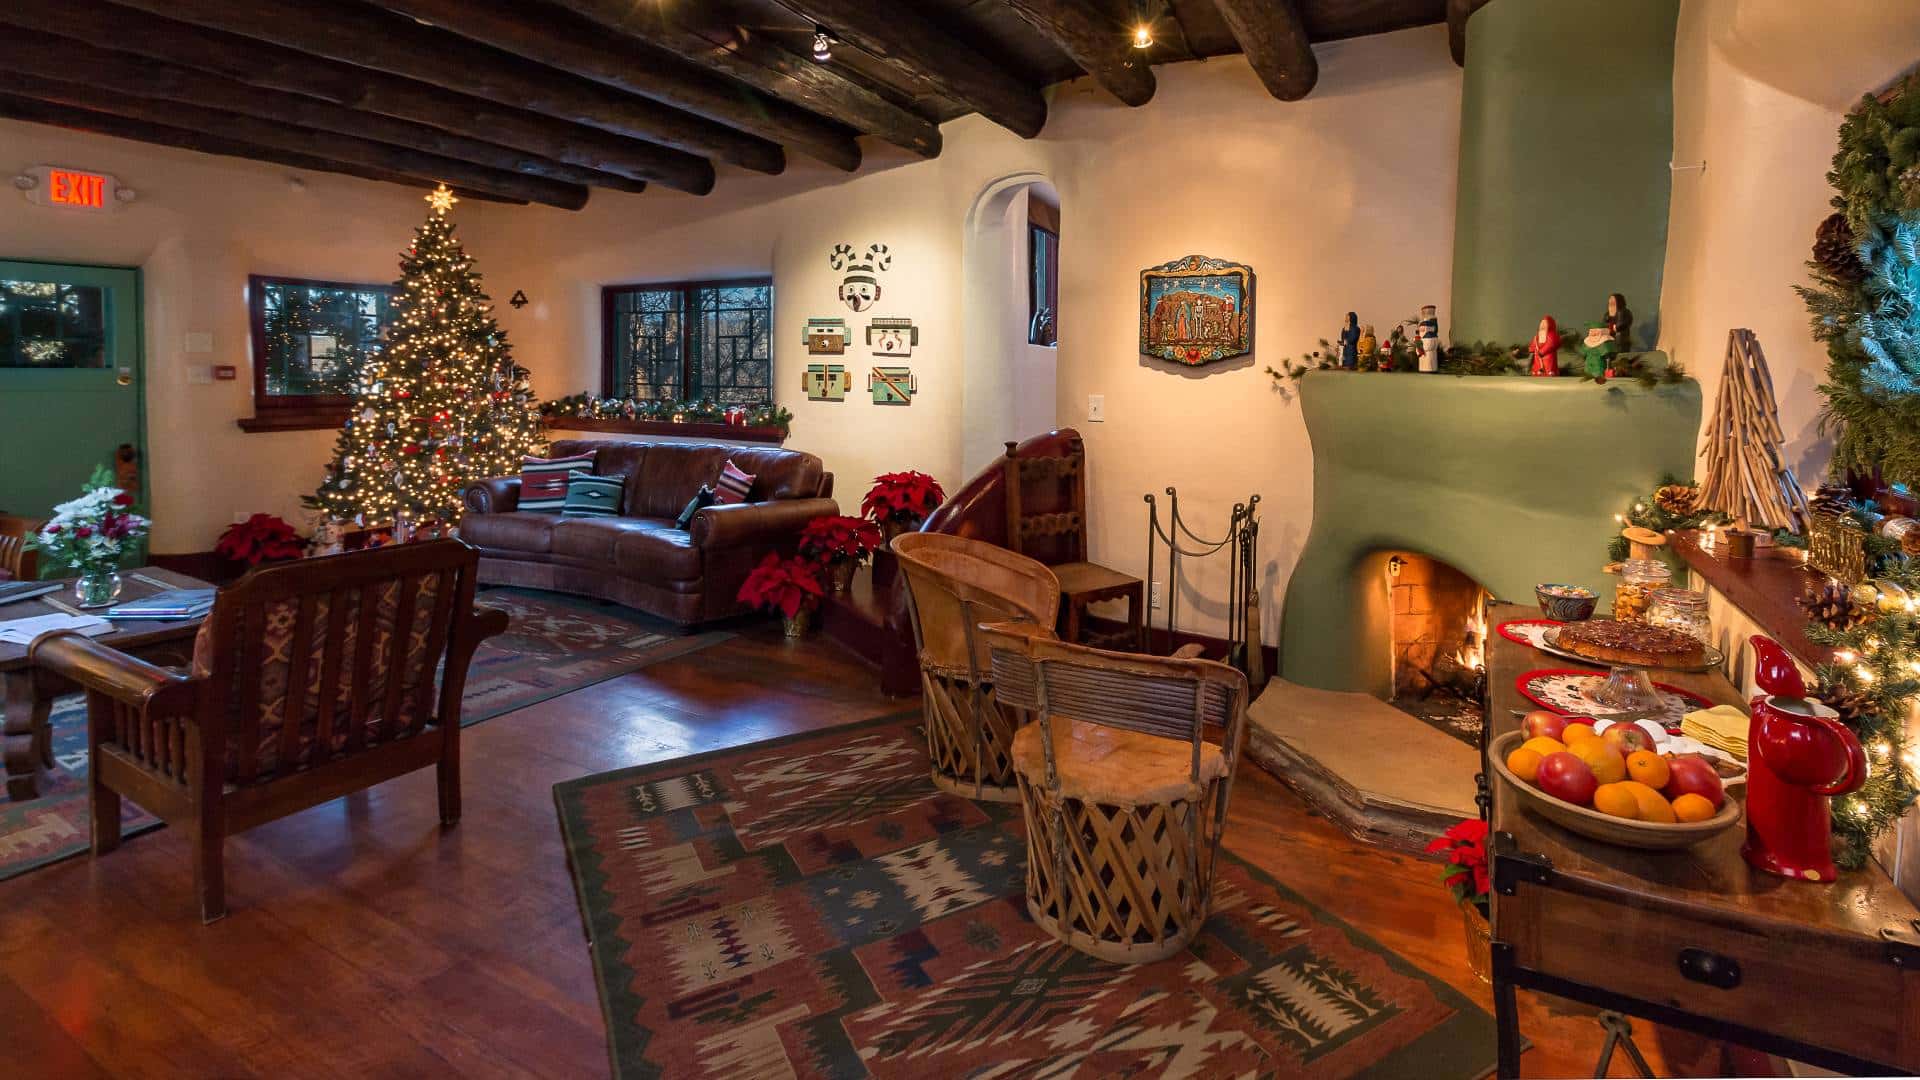 Inn living room decorated for Christmas with Christmas Tree